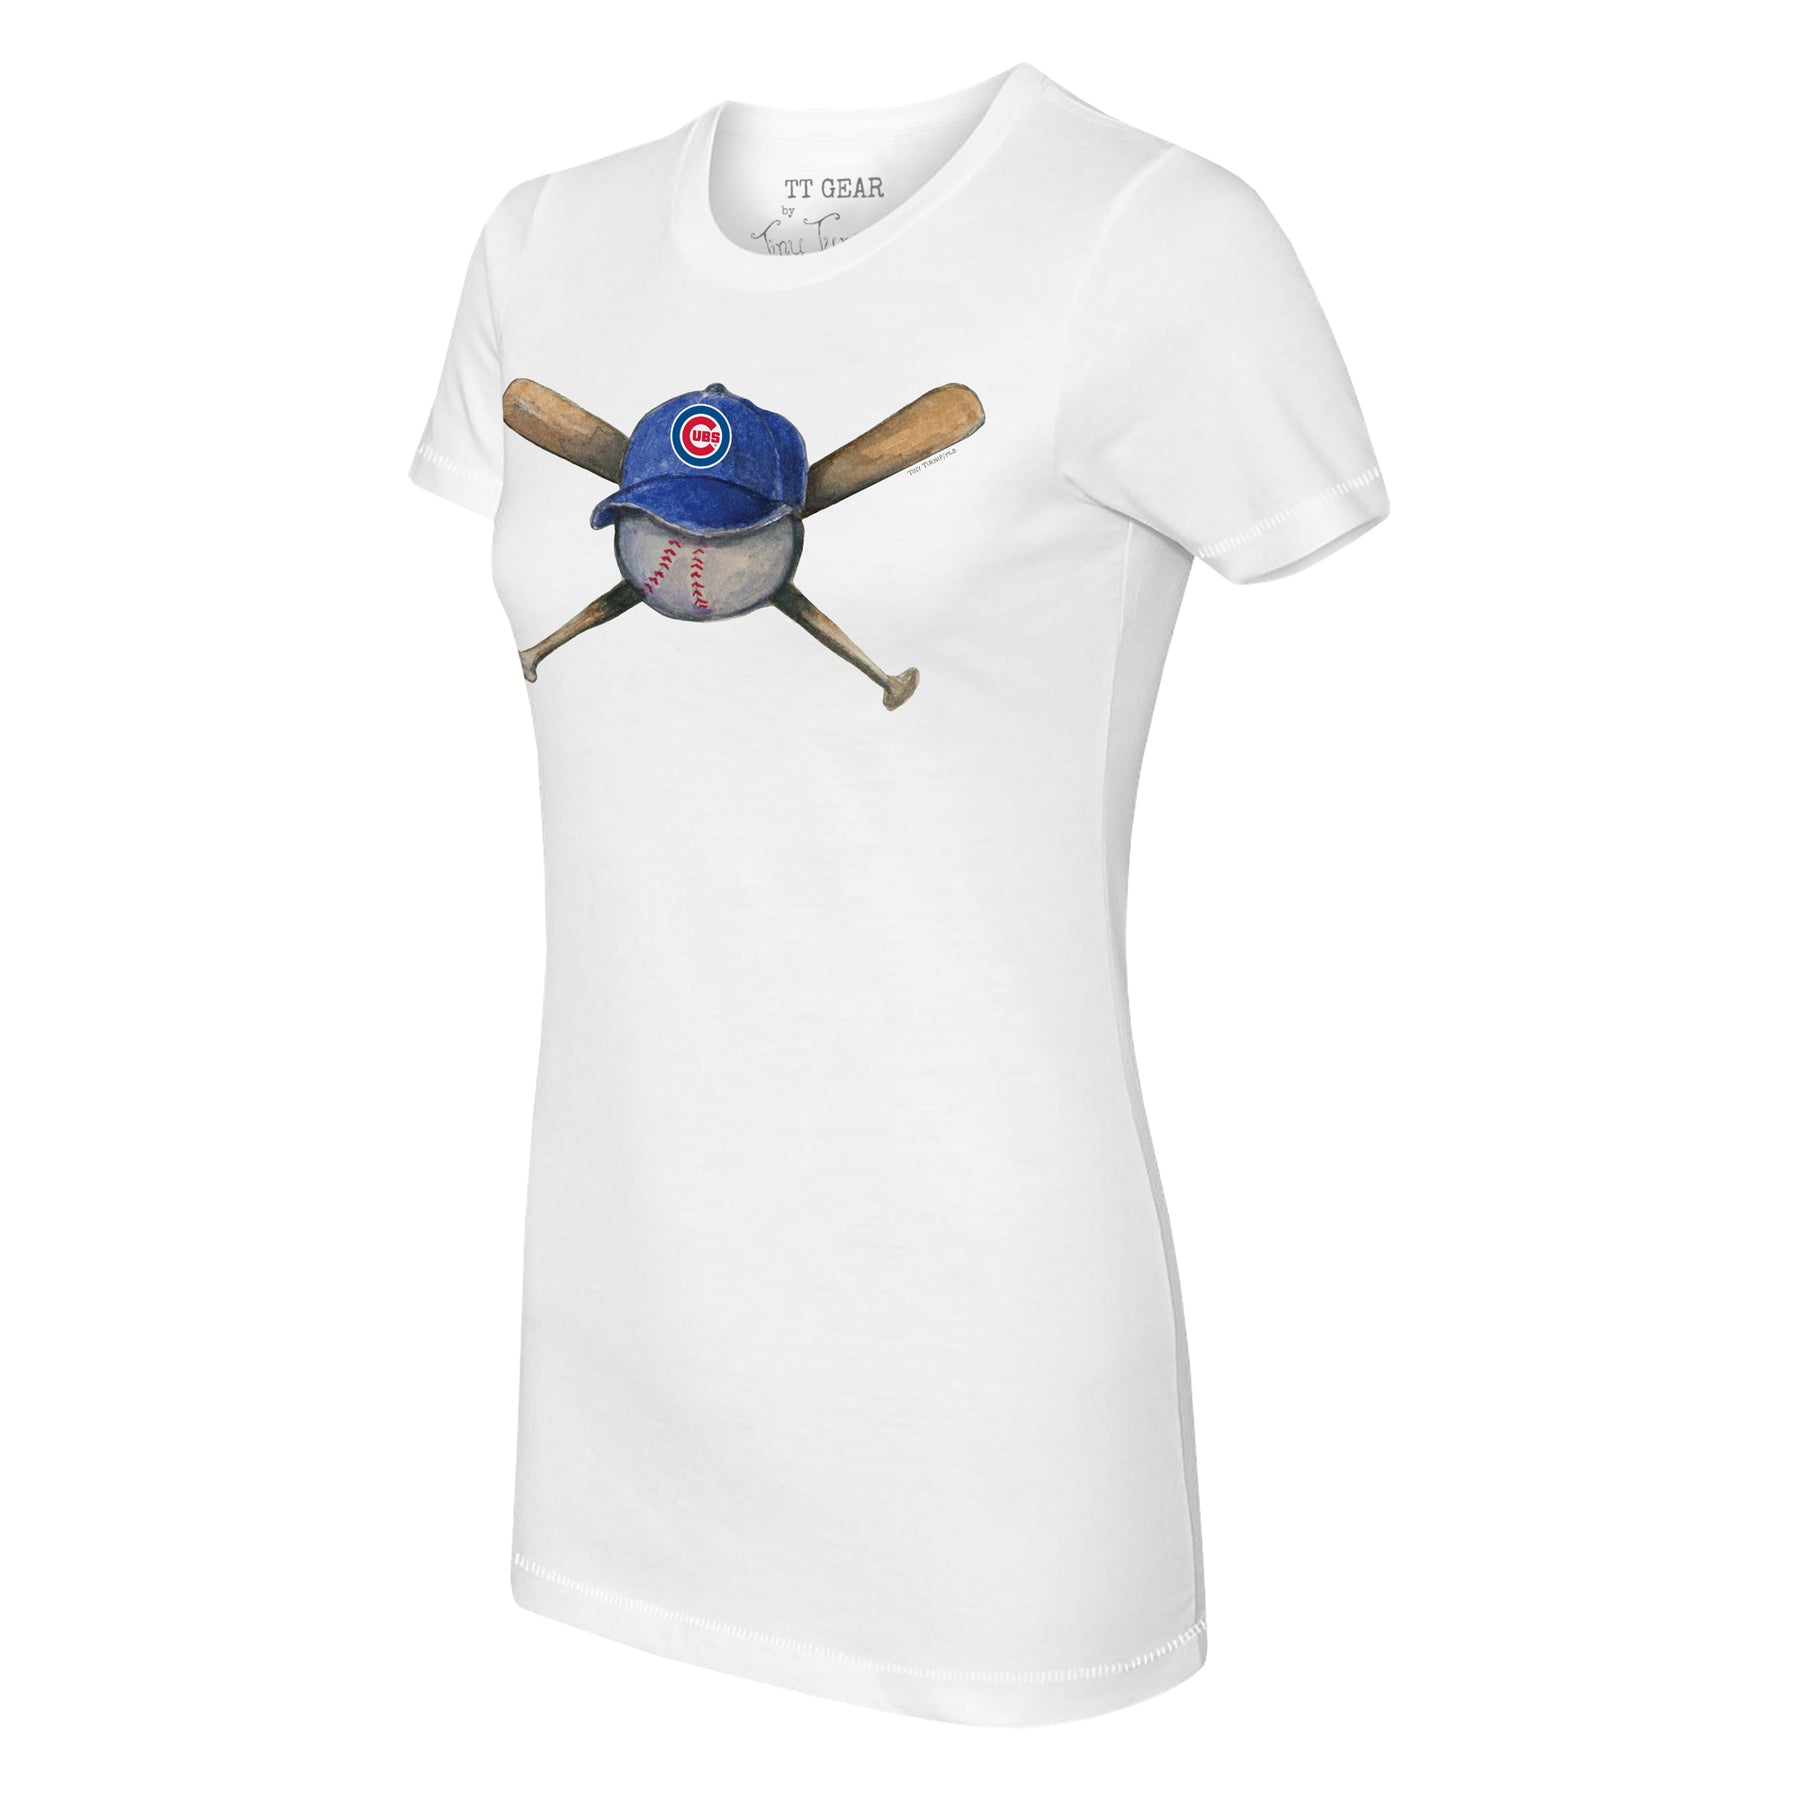 Fly the W white Chicago Cubs T-Shirt, Chicago Cubs Fan, Fly the W Fan  Baseball Tee, Chicago Cubs Fan Short Sleeve Blue and White T-shirt